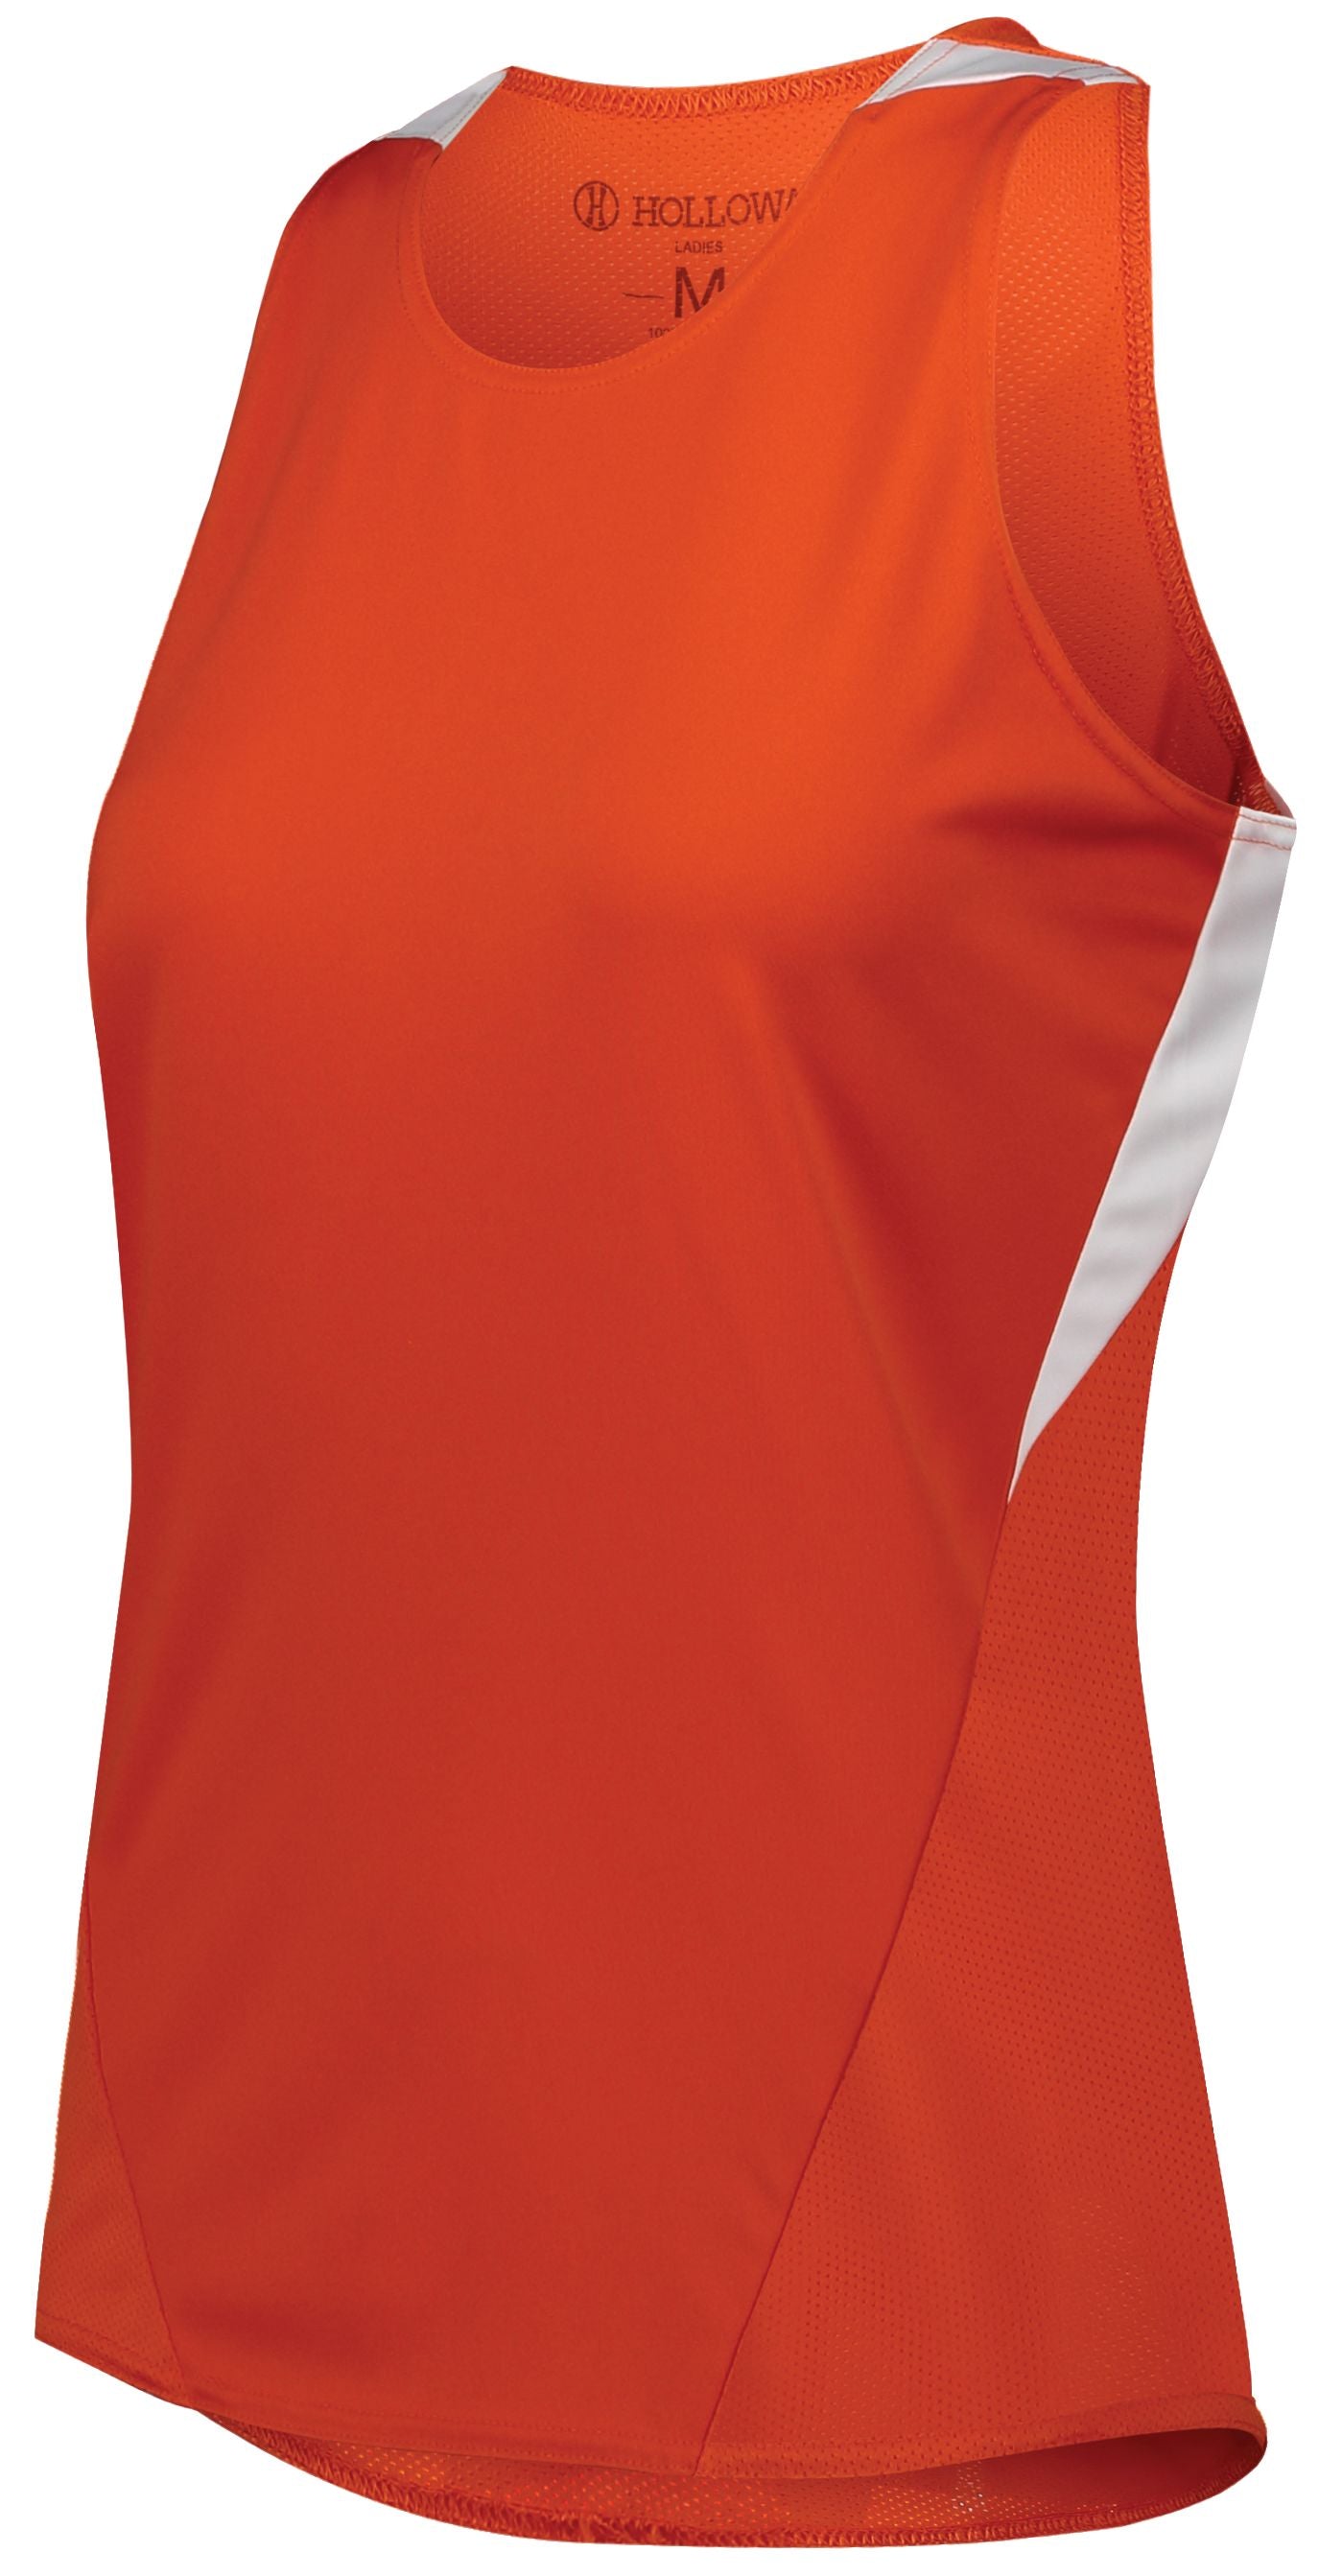 Holloway Ladies Pr Max Track Jersey in Orange/White  -Part of the Ladies, Ladies-Jersey, Track-Field, Holloway, Shirts product lines at KanaleyCreations.com